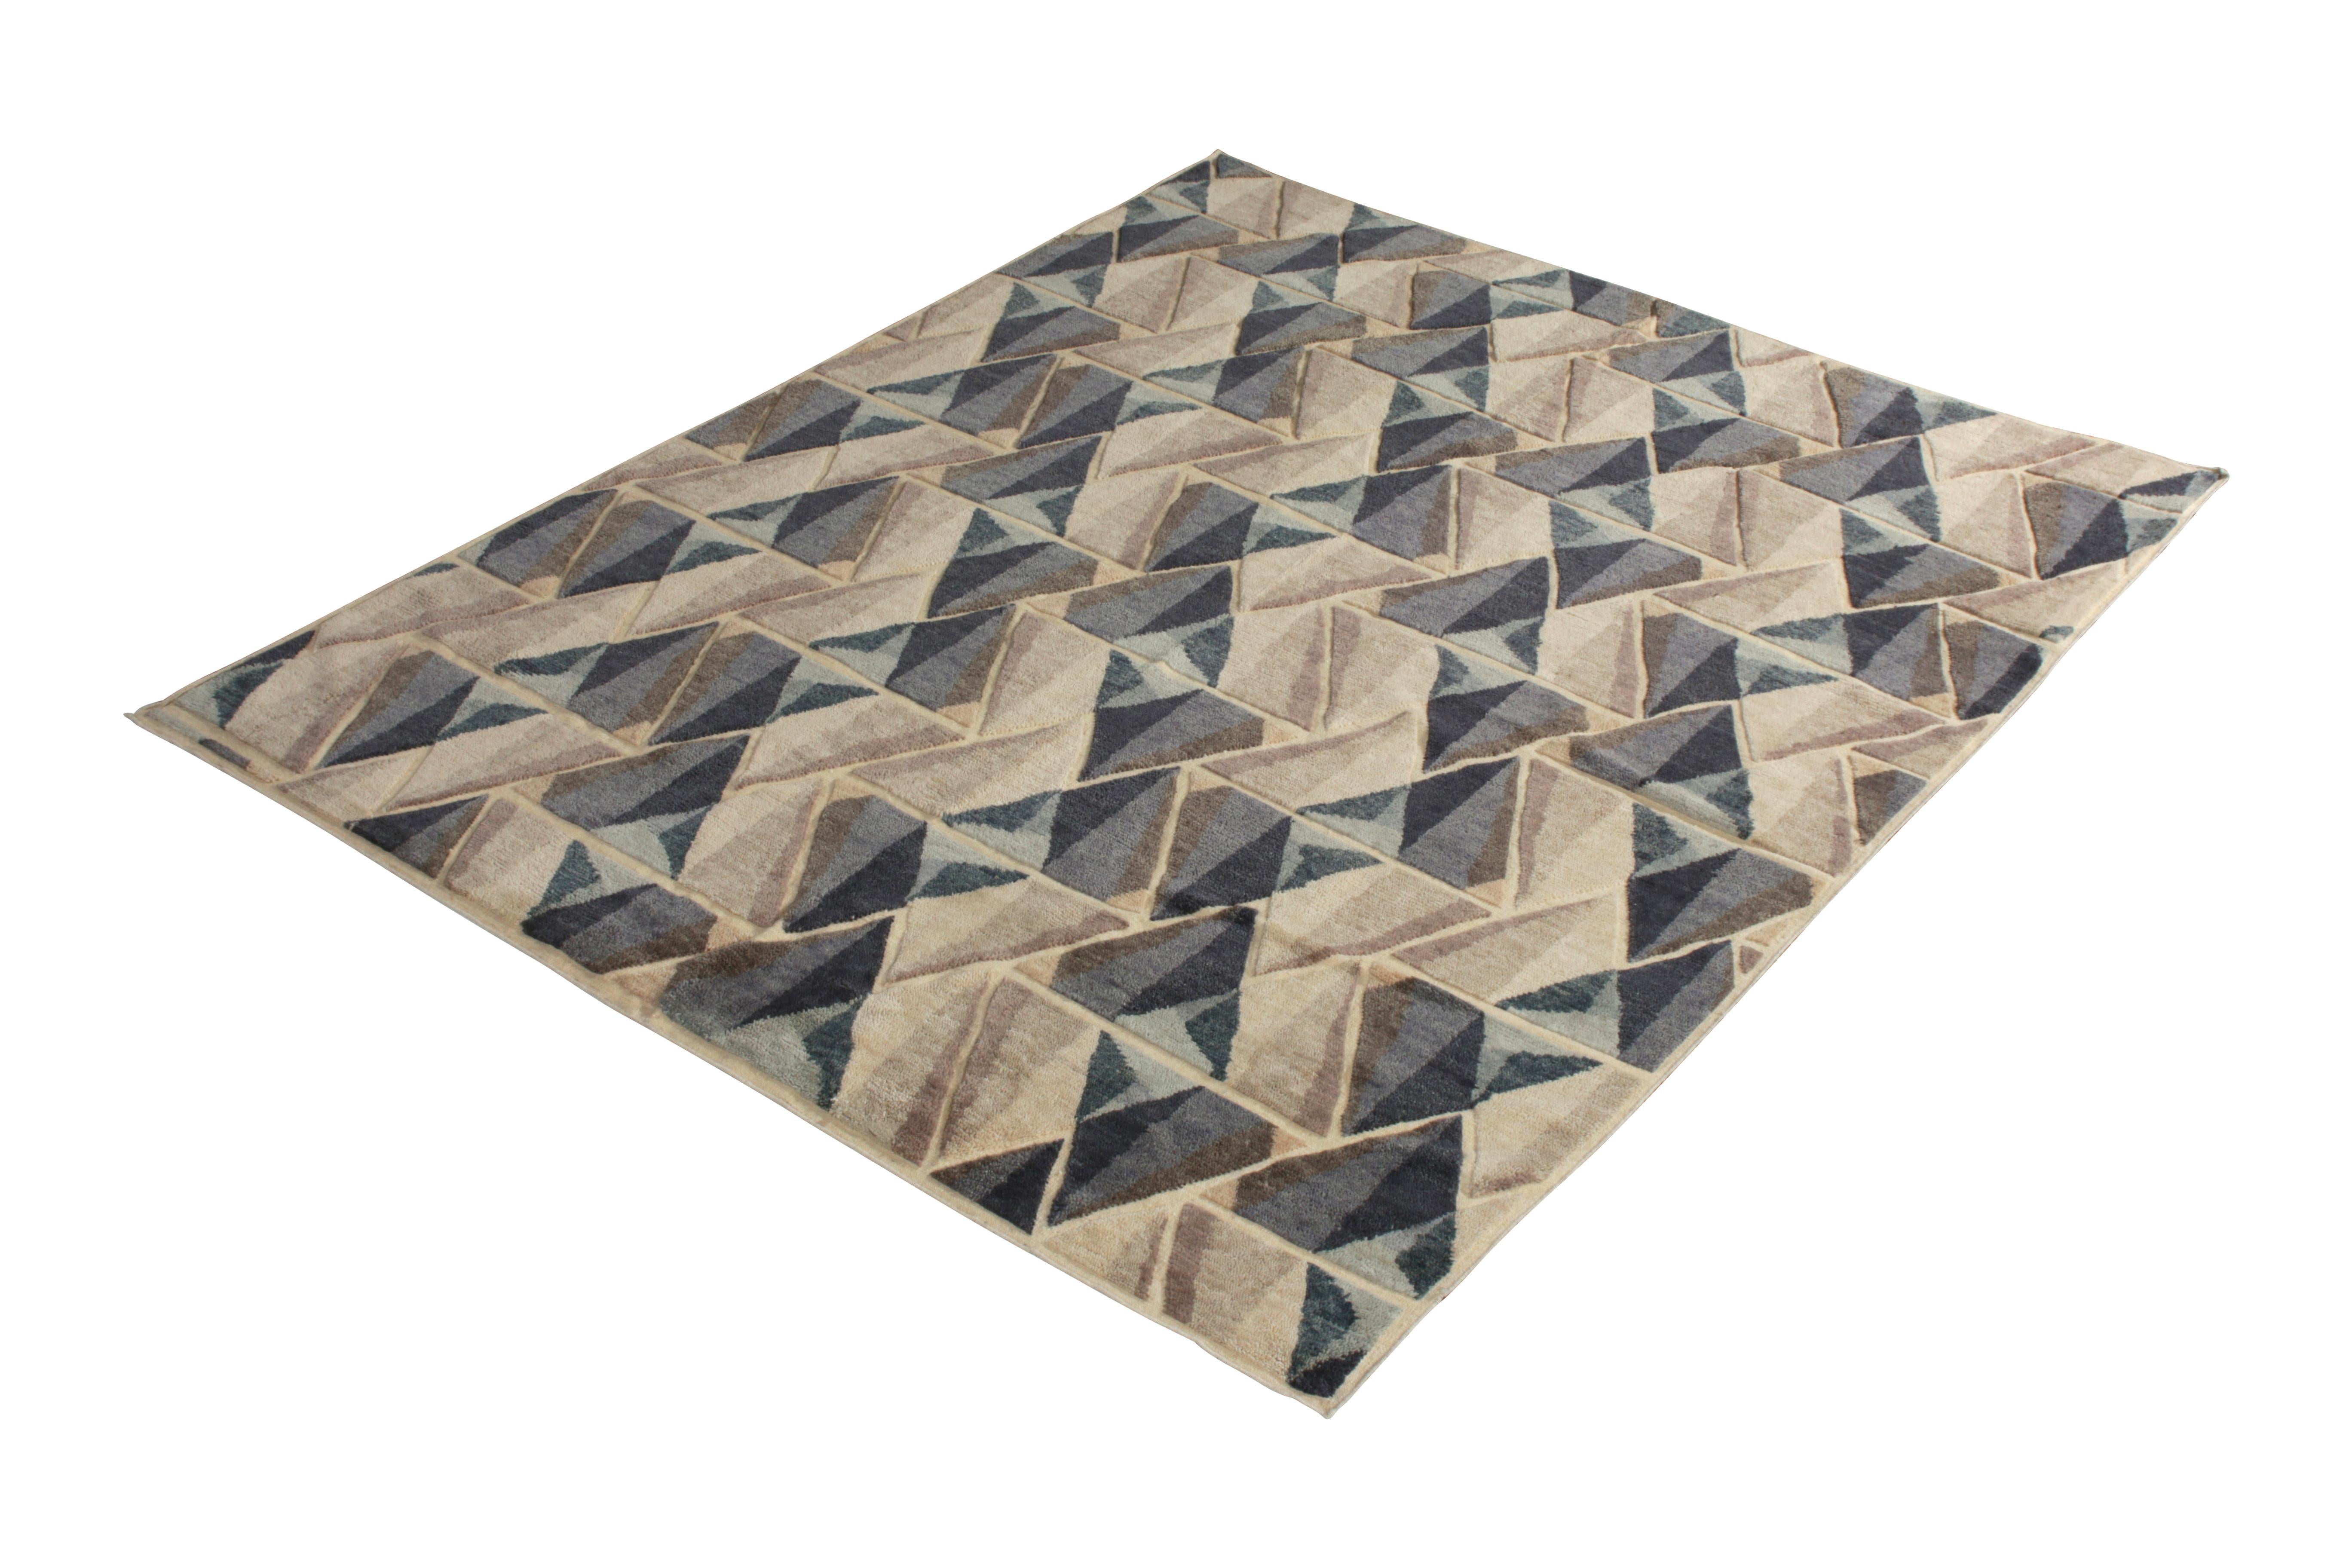 Hand knotted in texturally soft, durable wool pile, this modern 8 x 10 rug hails from the latest pile additions to Rug & Kilim’s Scandinavian collection, a celebration of Swedish modernism with new large scale geometry and exciting vintage colorways